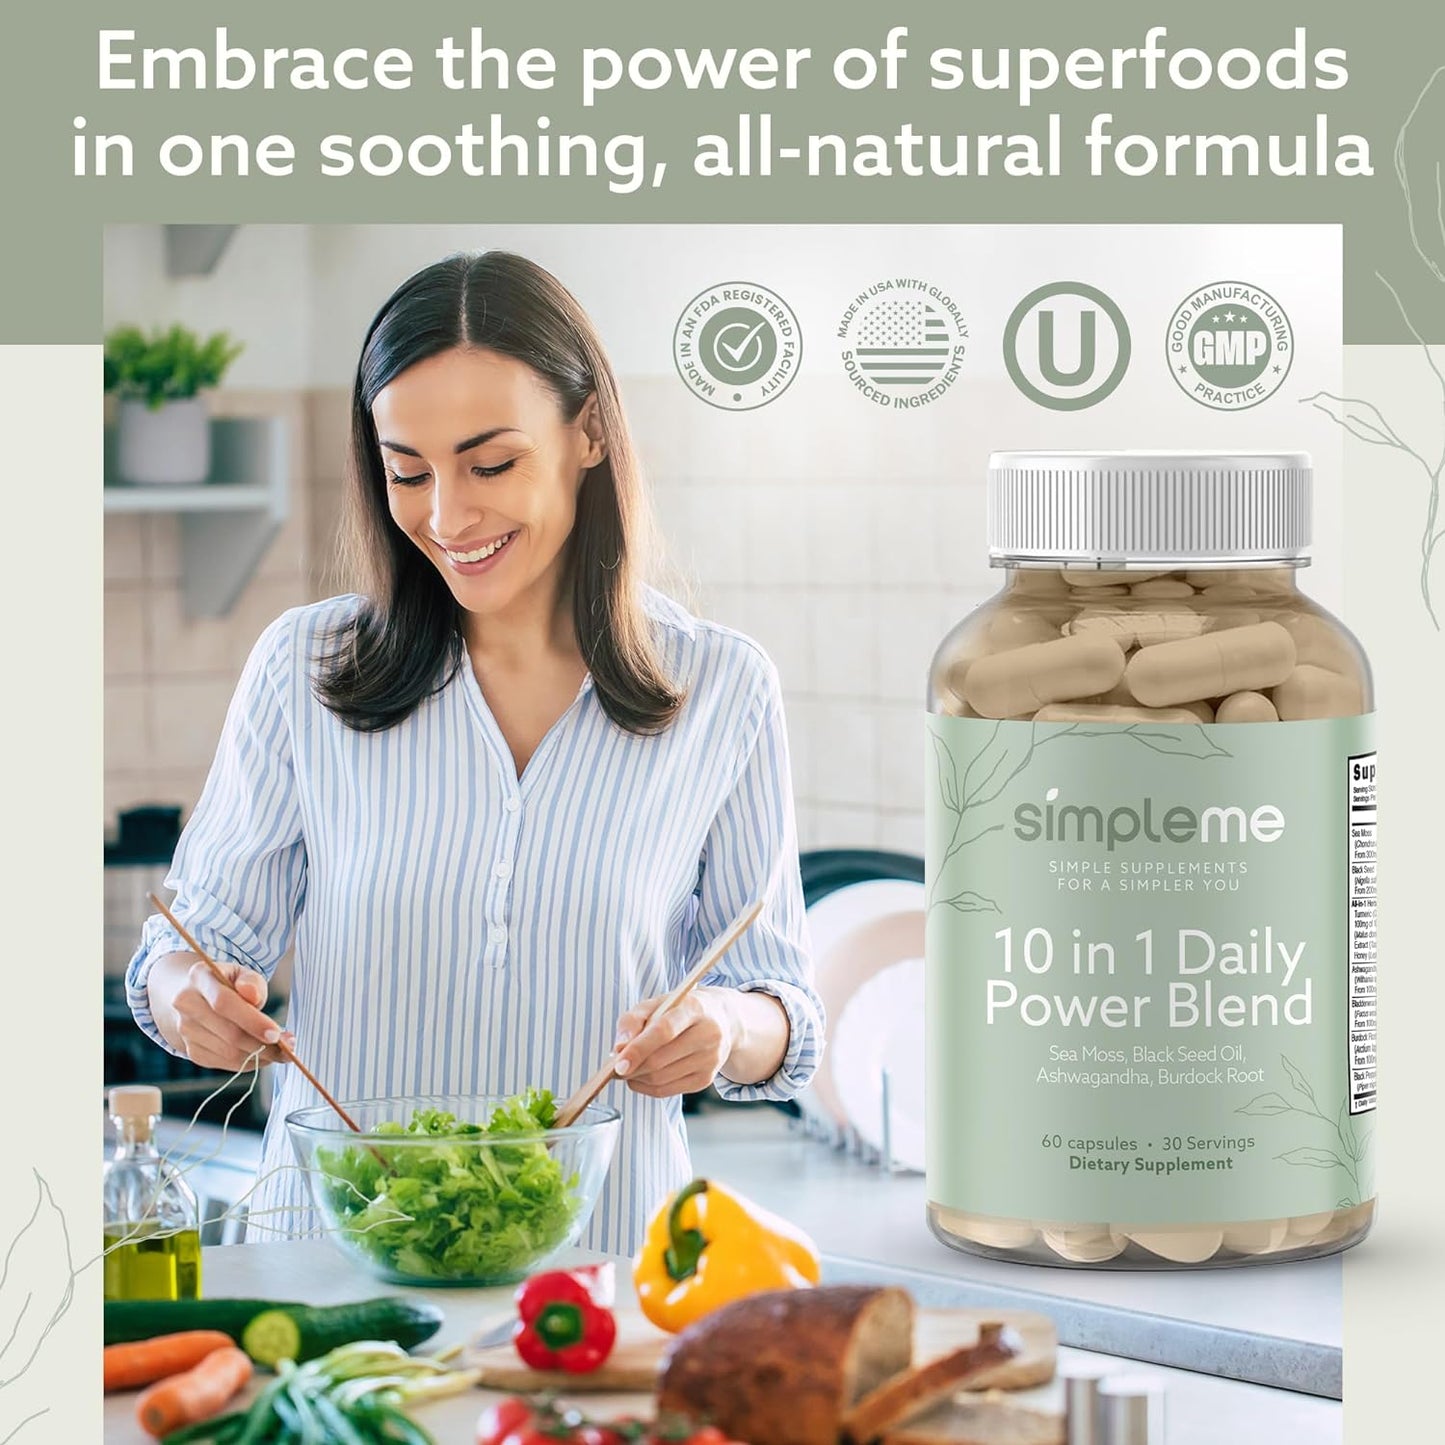 10 in 1 Daily Power Blend